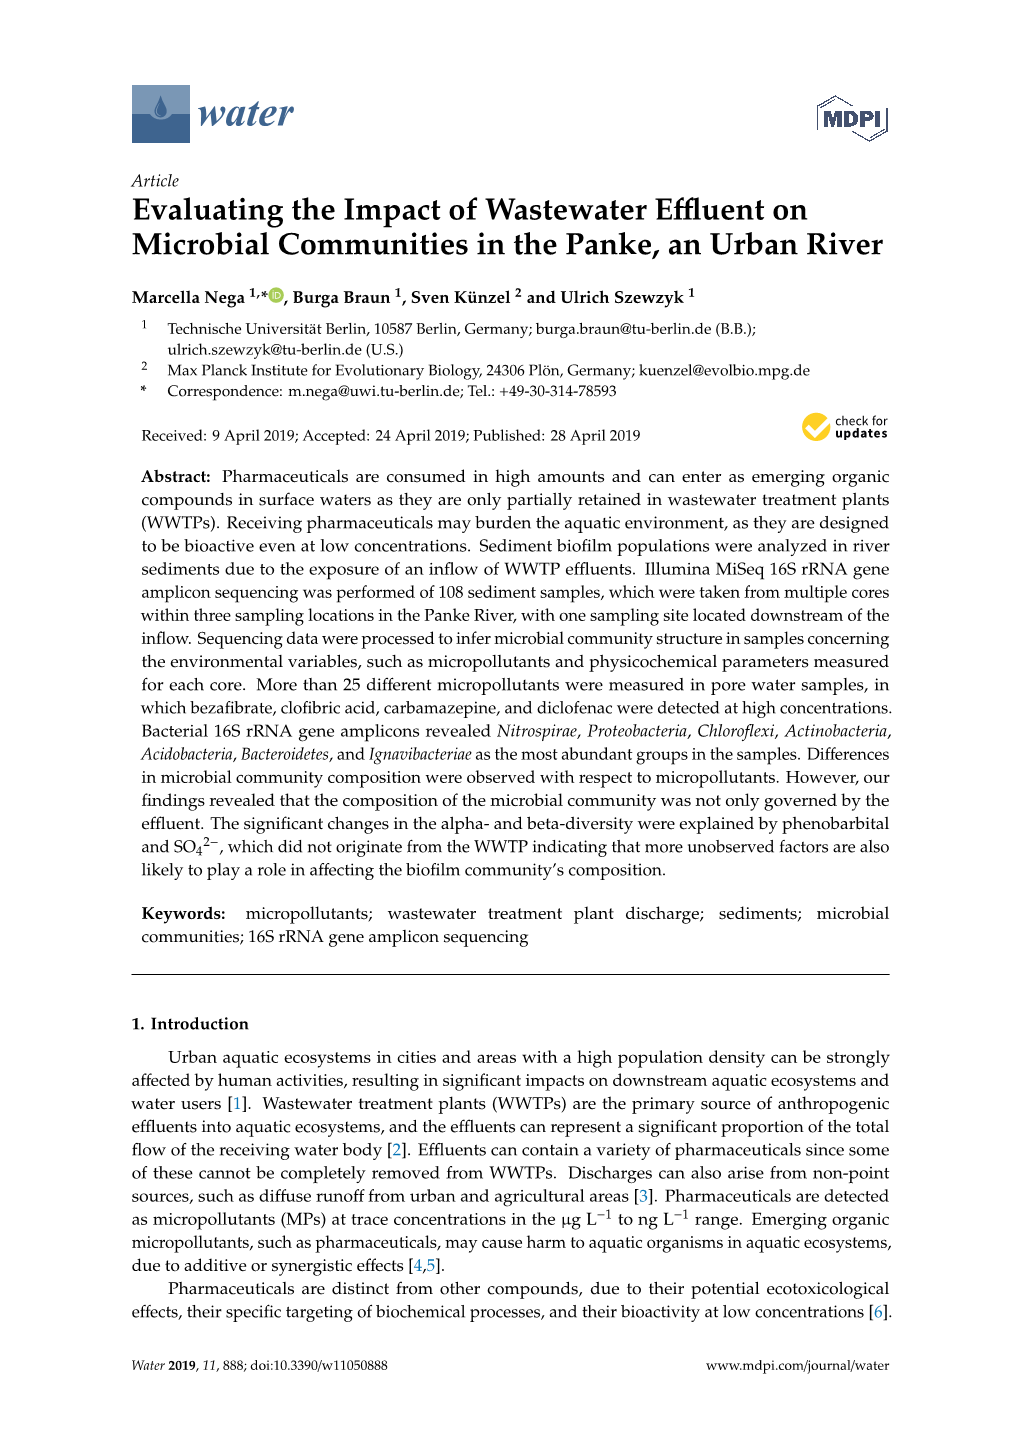 Evaluating the Impact of Wastewater Effluent on Microbial Communities in the Panke, an Urban River